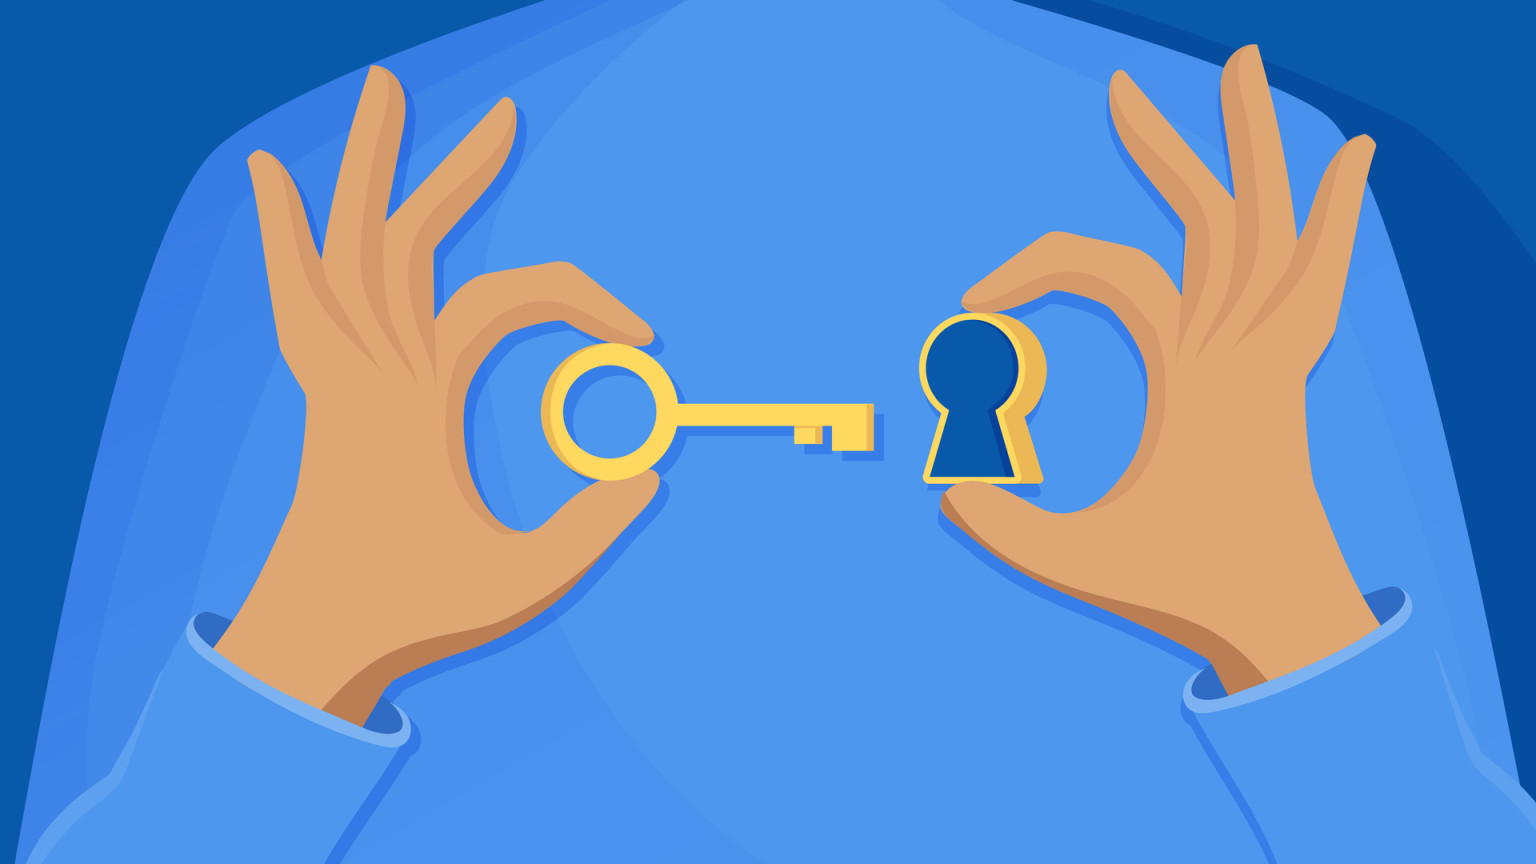 Just like a password, an API key is a code that helps secure your API (Application Programming Interface). Learn more on the Contentful blog.